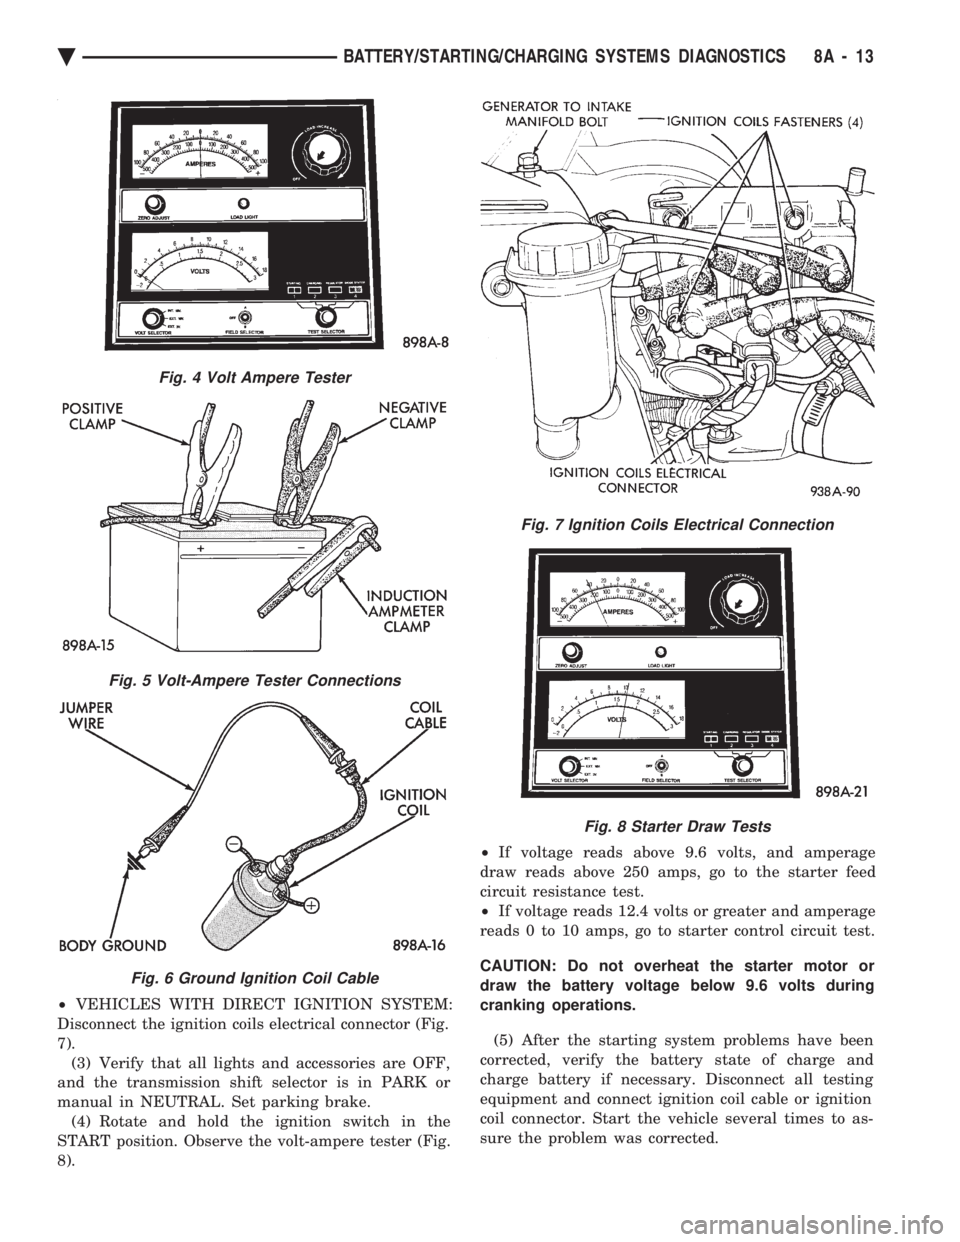 CHEVROLET DYNASTY 1993  Service Manual ² VEHICLES WITH DIRECT IGNITION SYSTEM: 
Disconnect the ignition coils electrical connector (Fig.
7). (3) Verify that all lights and accessories are OFF,
and the transmission shift selector is in PAR